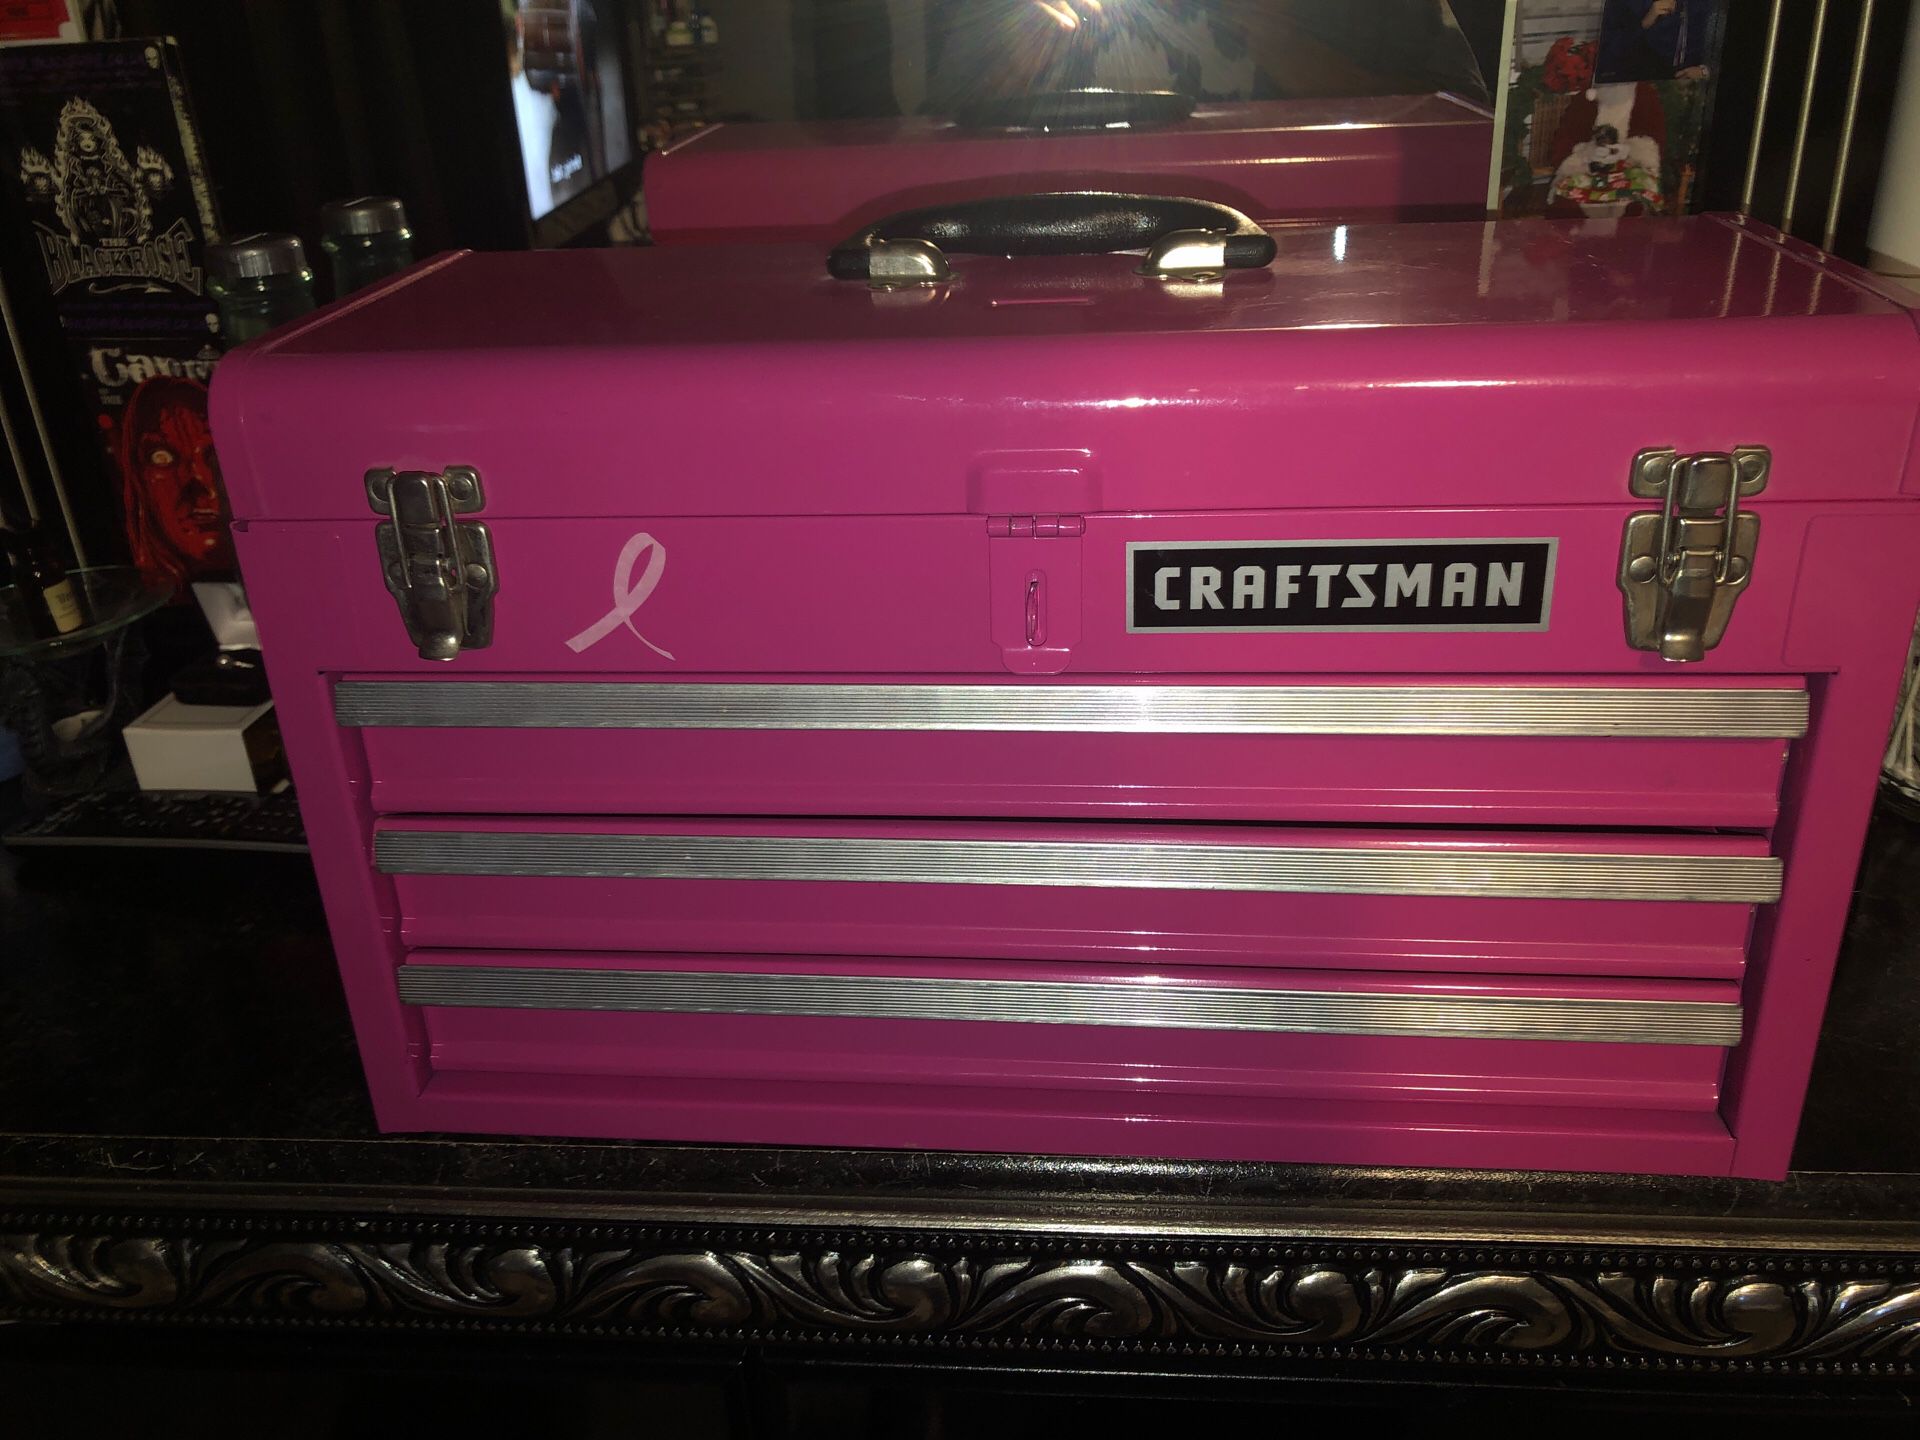 Craftsman Pink Box Tool Chests For house-handy, crafter woman